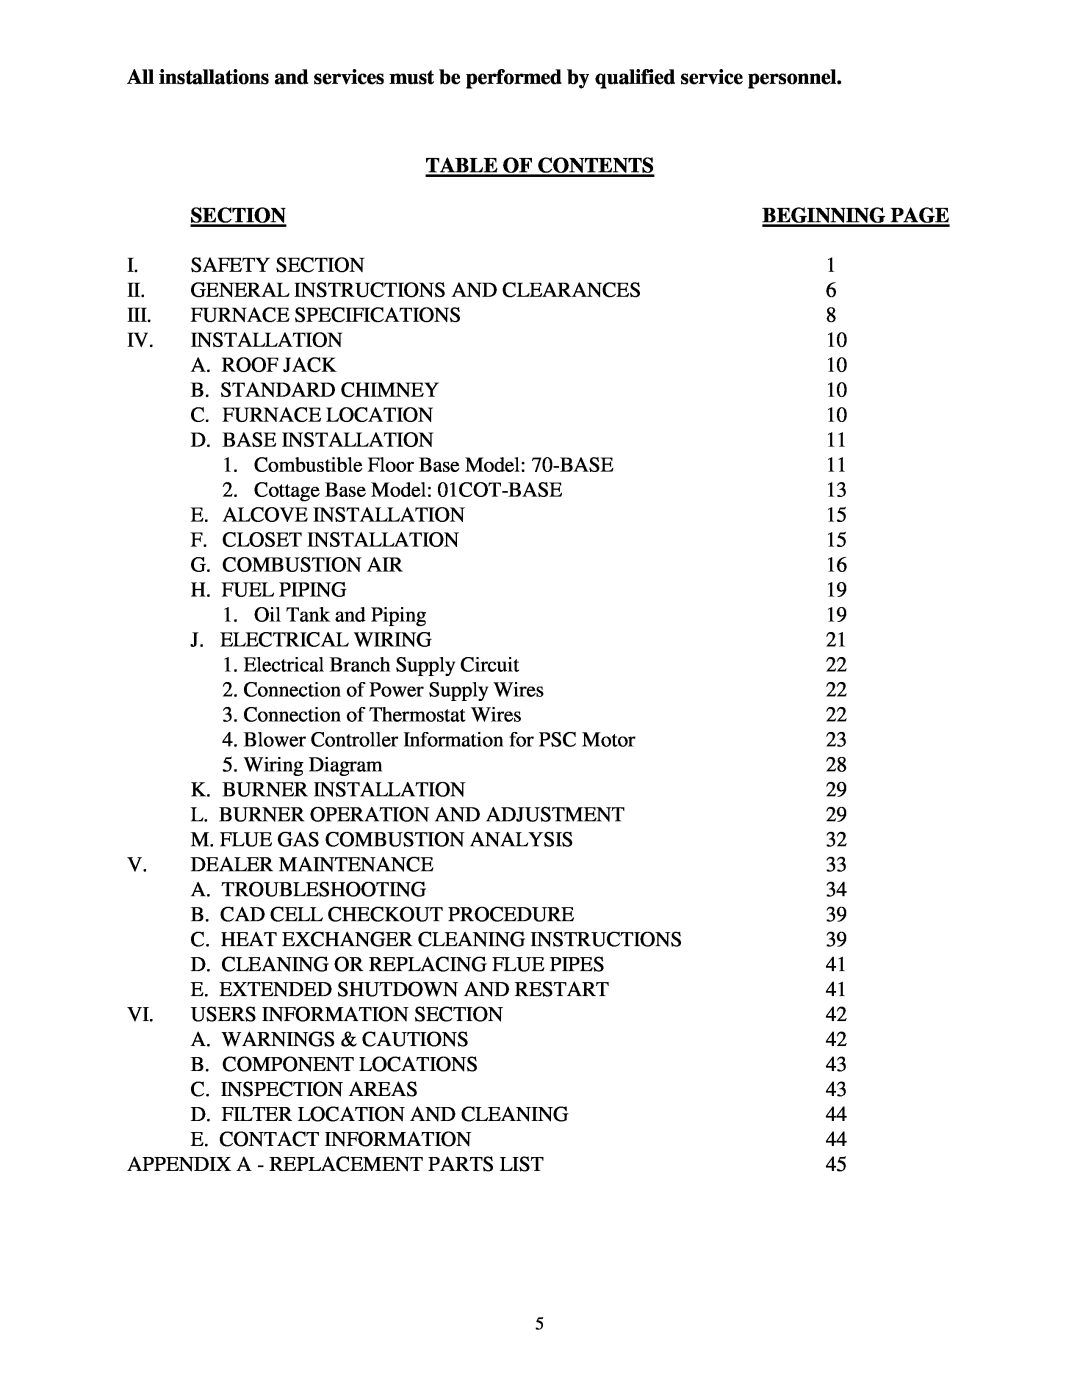 Thermo Products ome-72d36 service manual Table Of Contents, Section, Beginning Page 